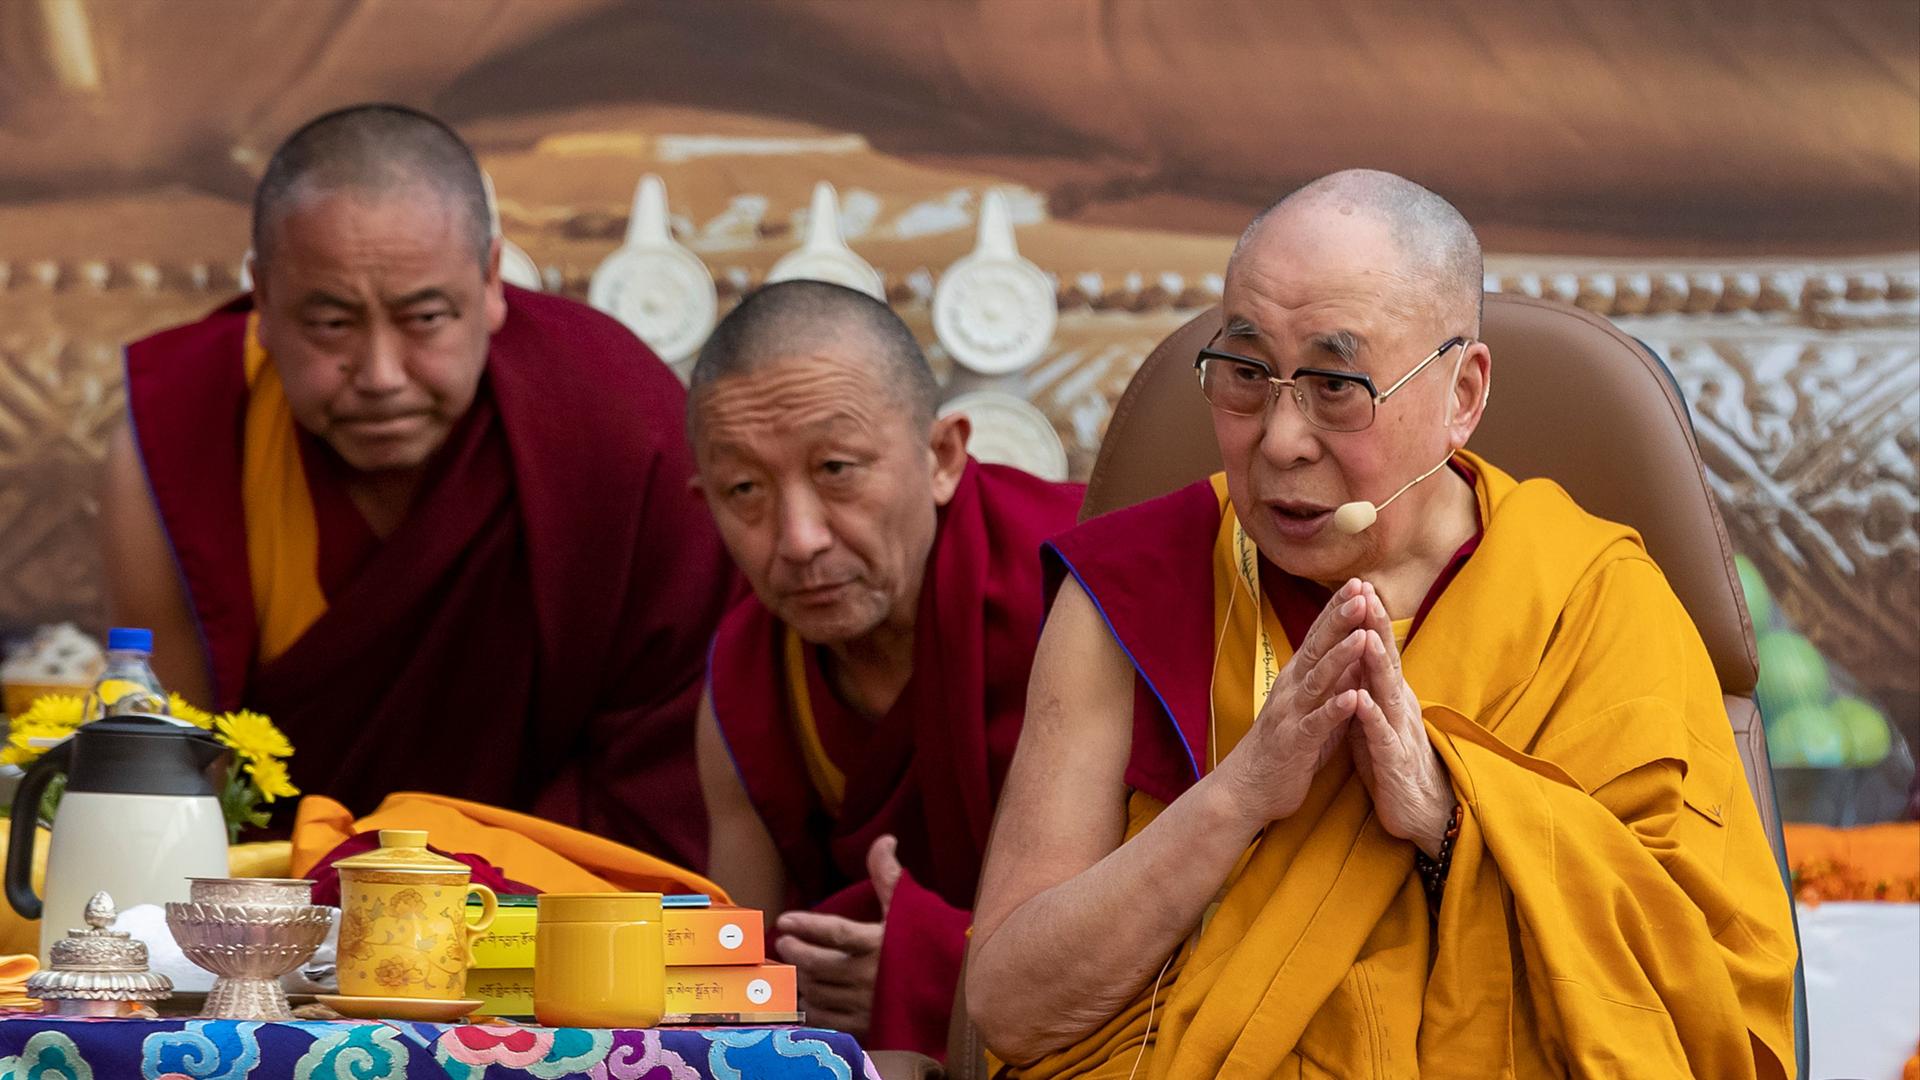 The Dalai Lama speaks while wearing a yellow robe. He is surrounded by two man on red robes in a monastery.